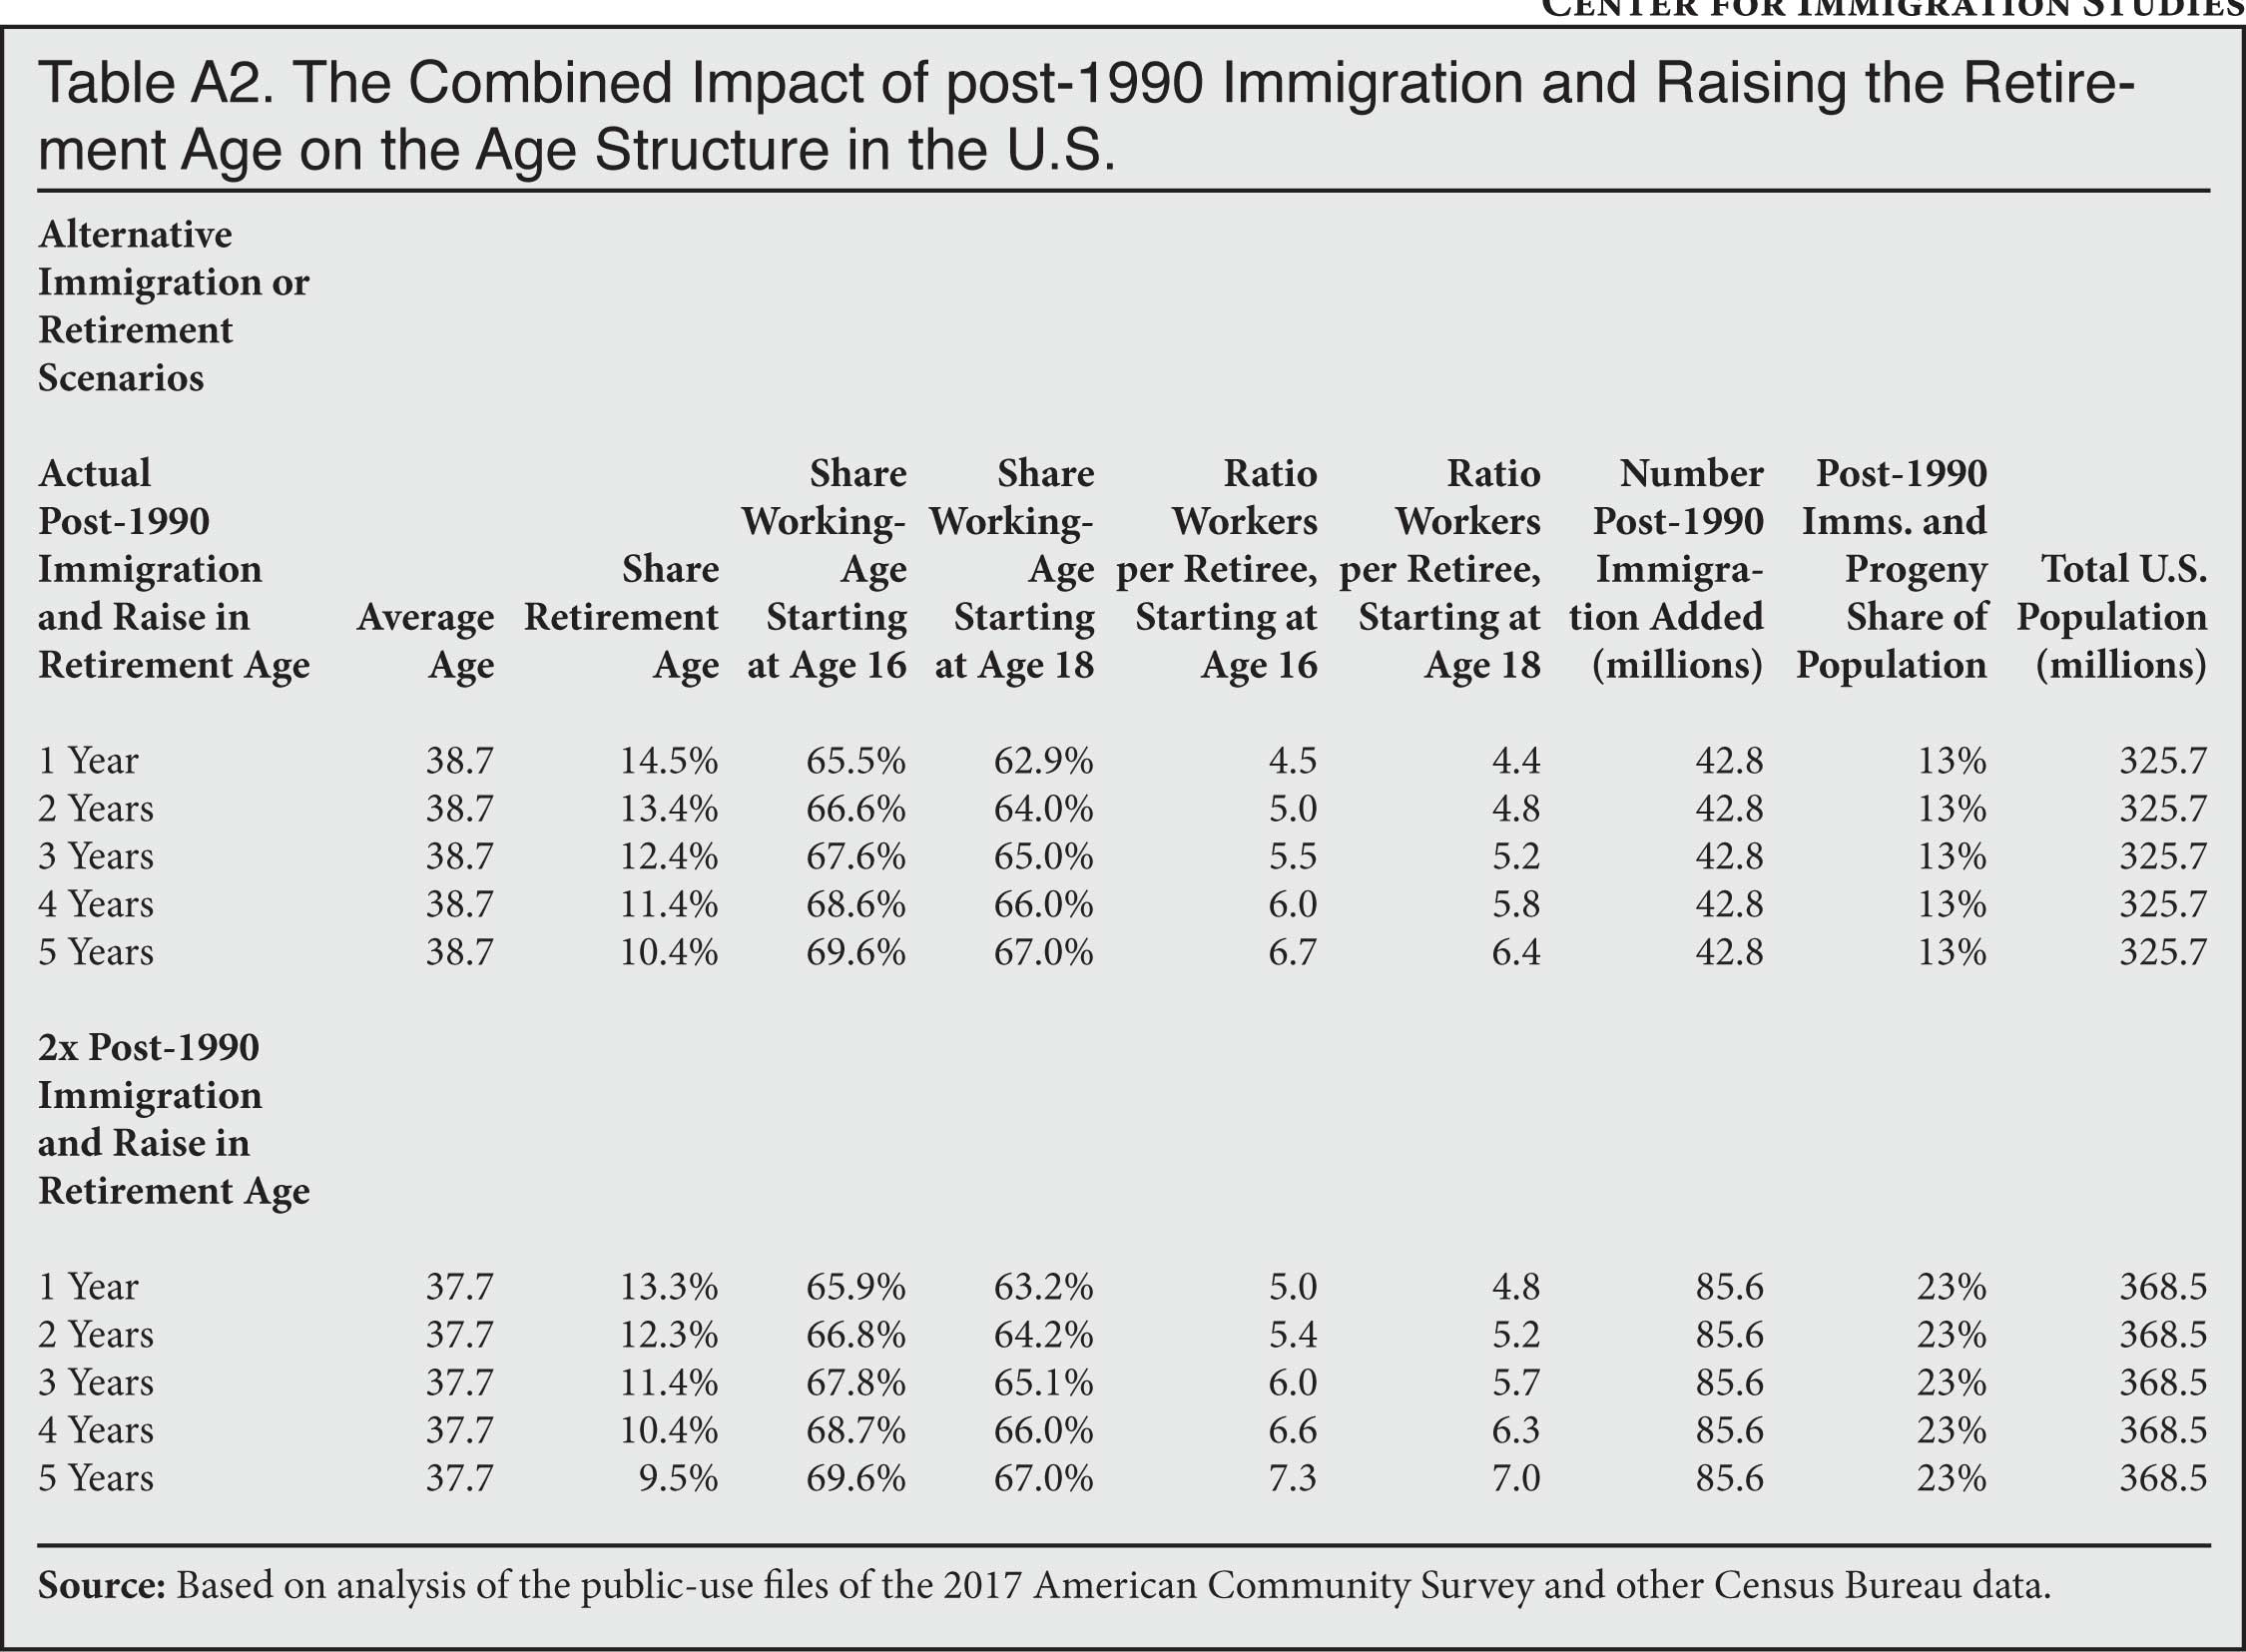 Table: The combined impact of post 1990 immigration and raising the retirement age on the age structure in the U.S.